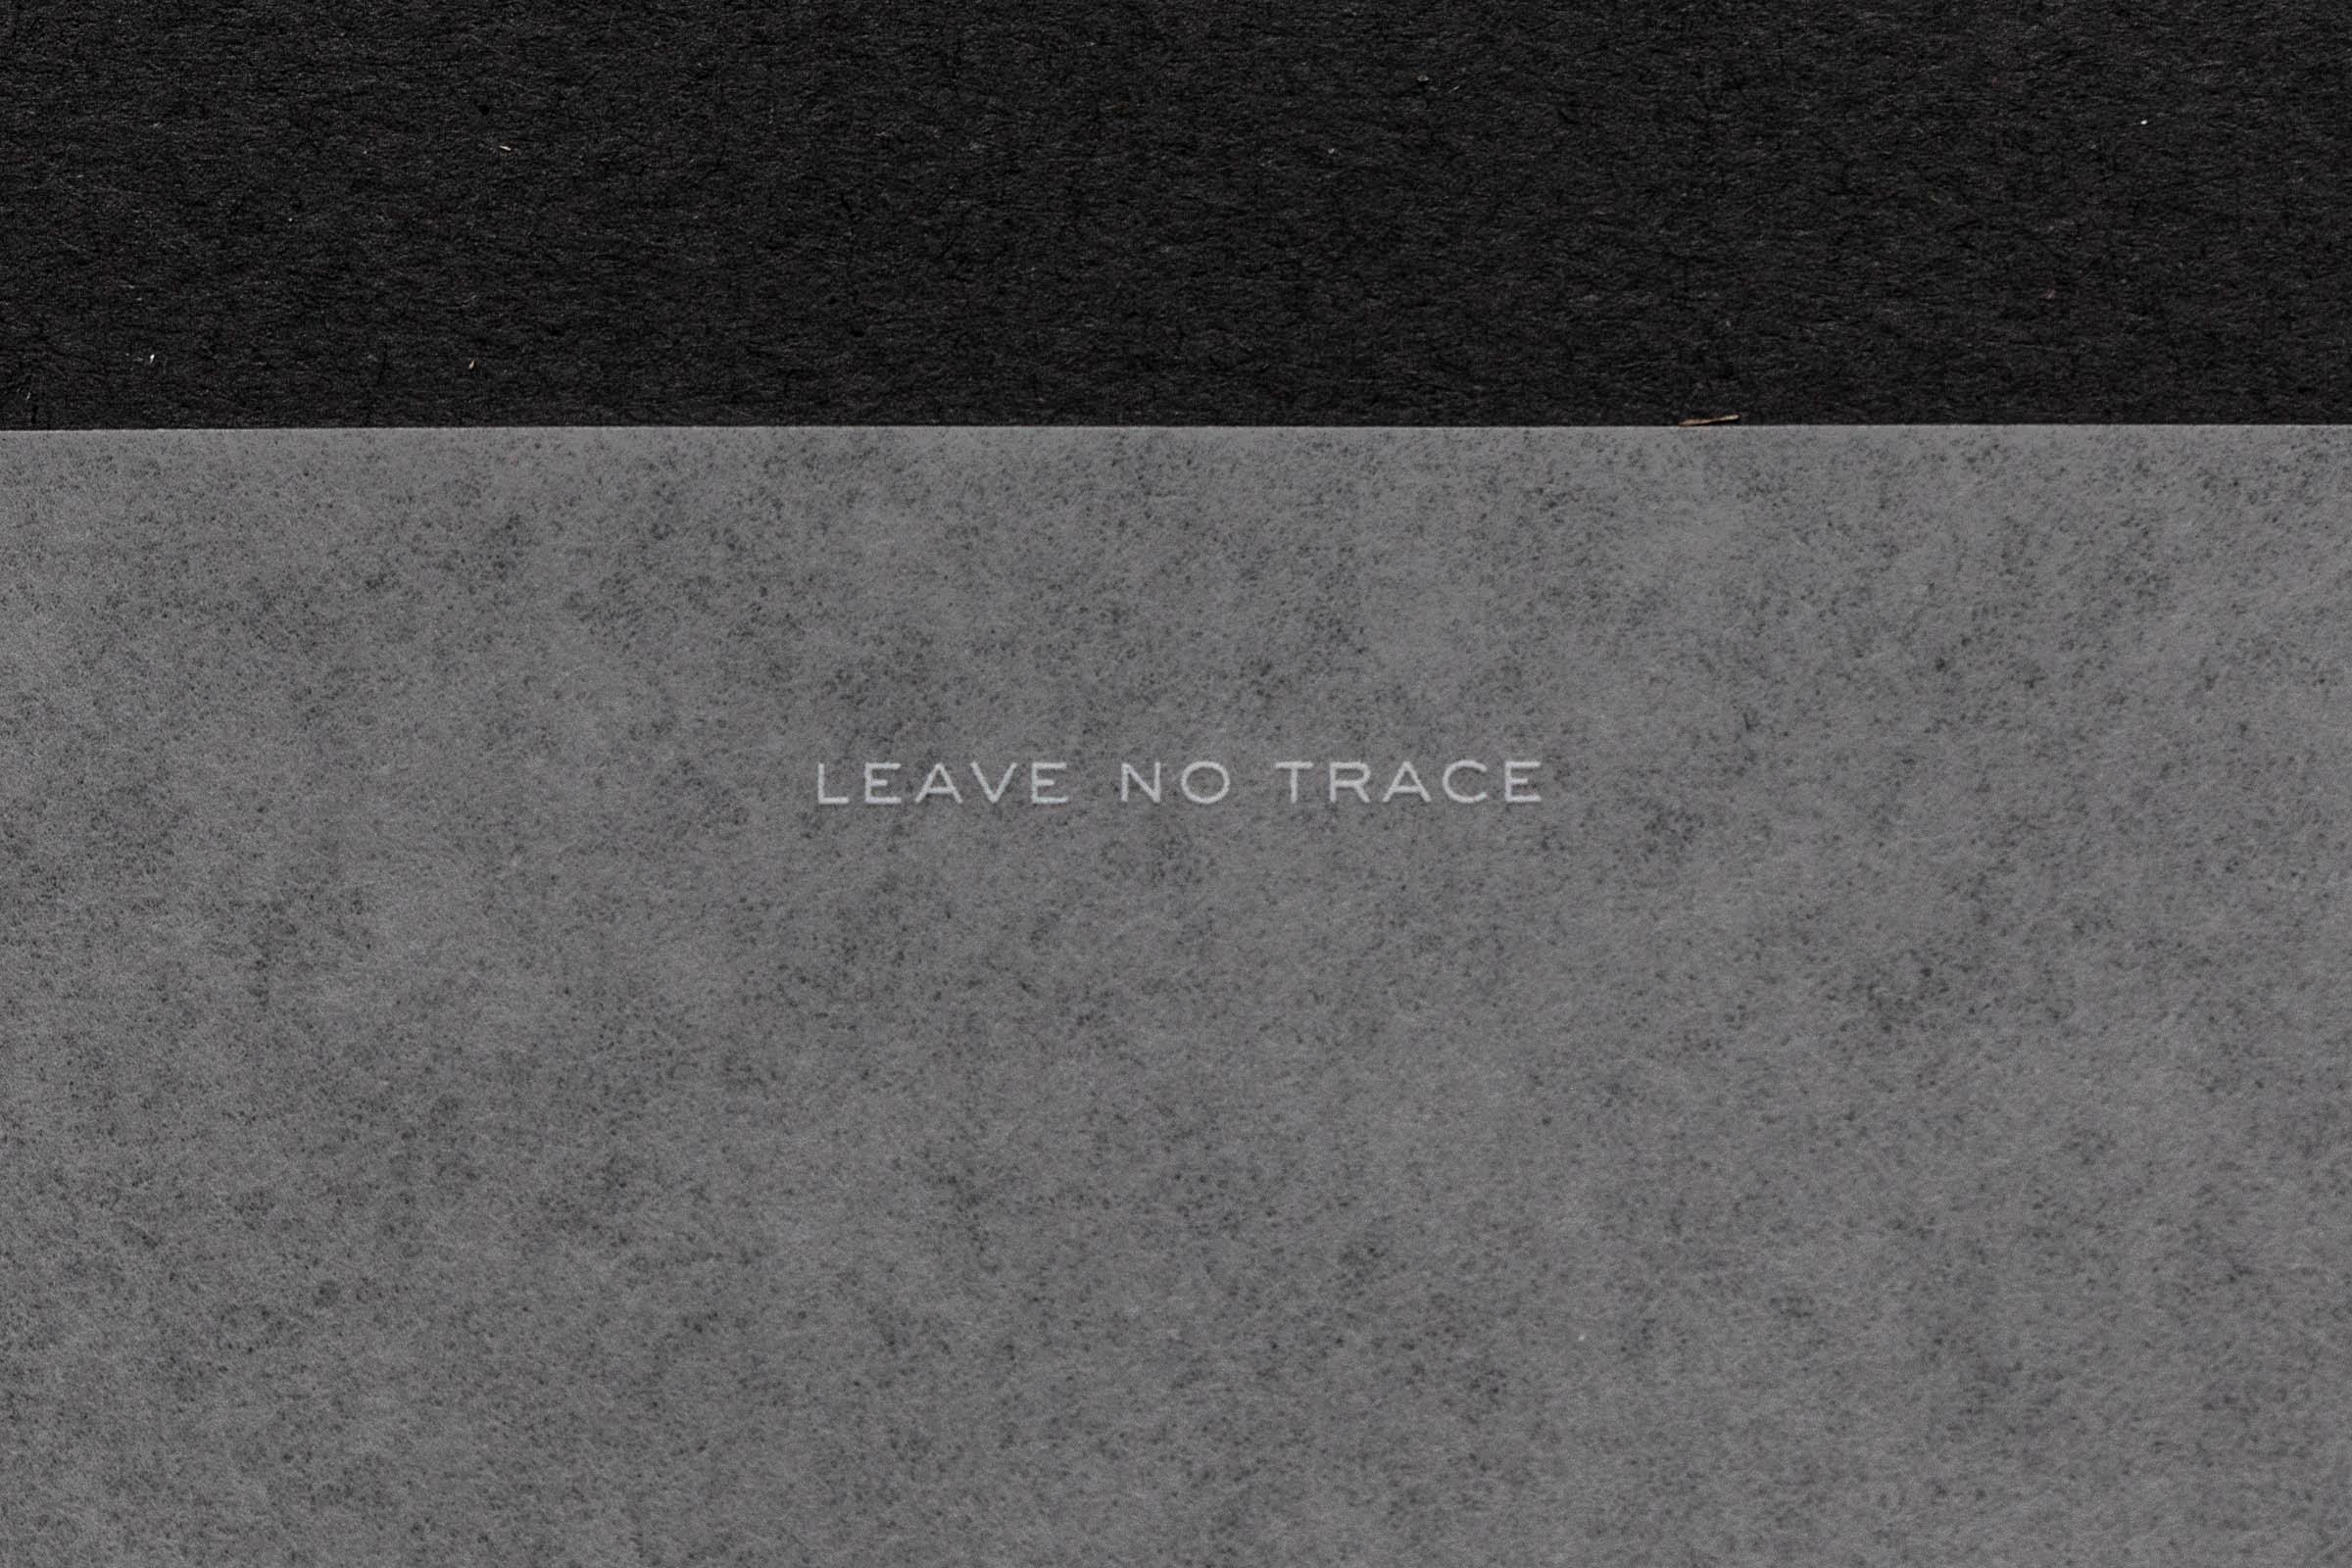 idm_leave_no_trace_invitation_luxe_pack_2019_by_mt_photo_et_copyright_idm_38.jpg